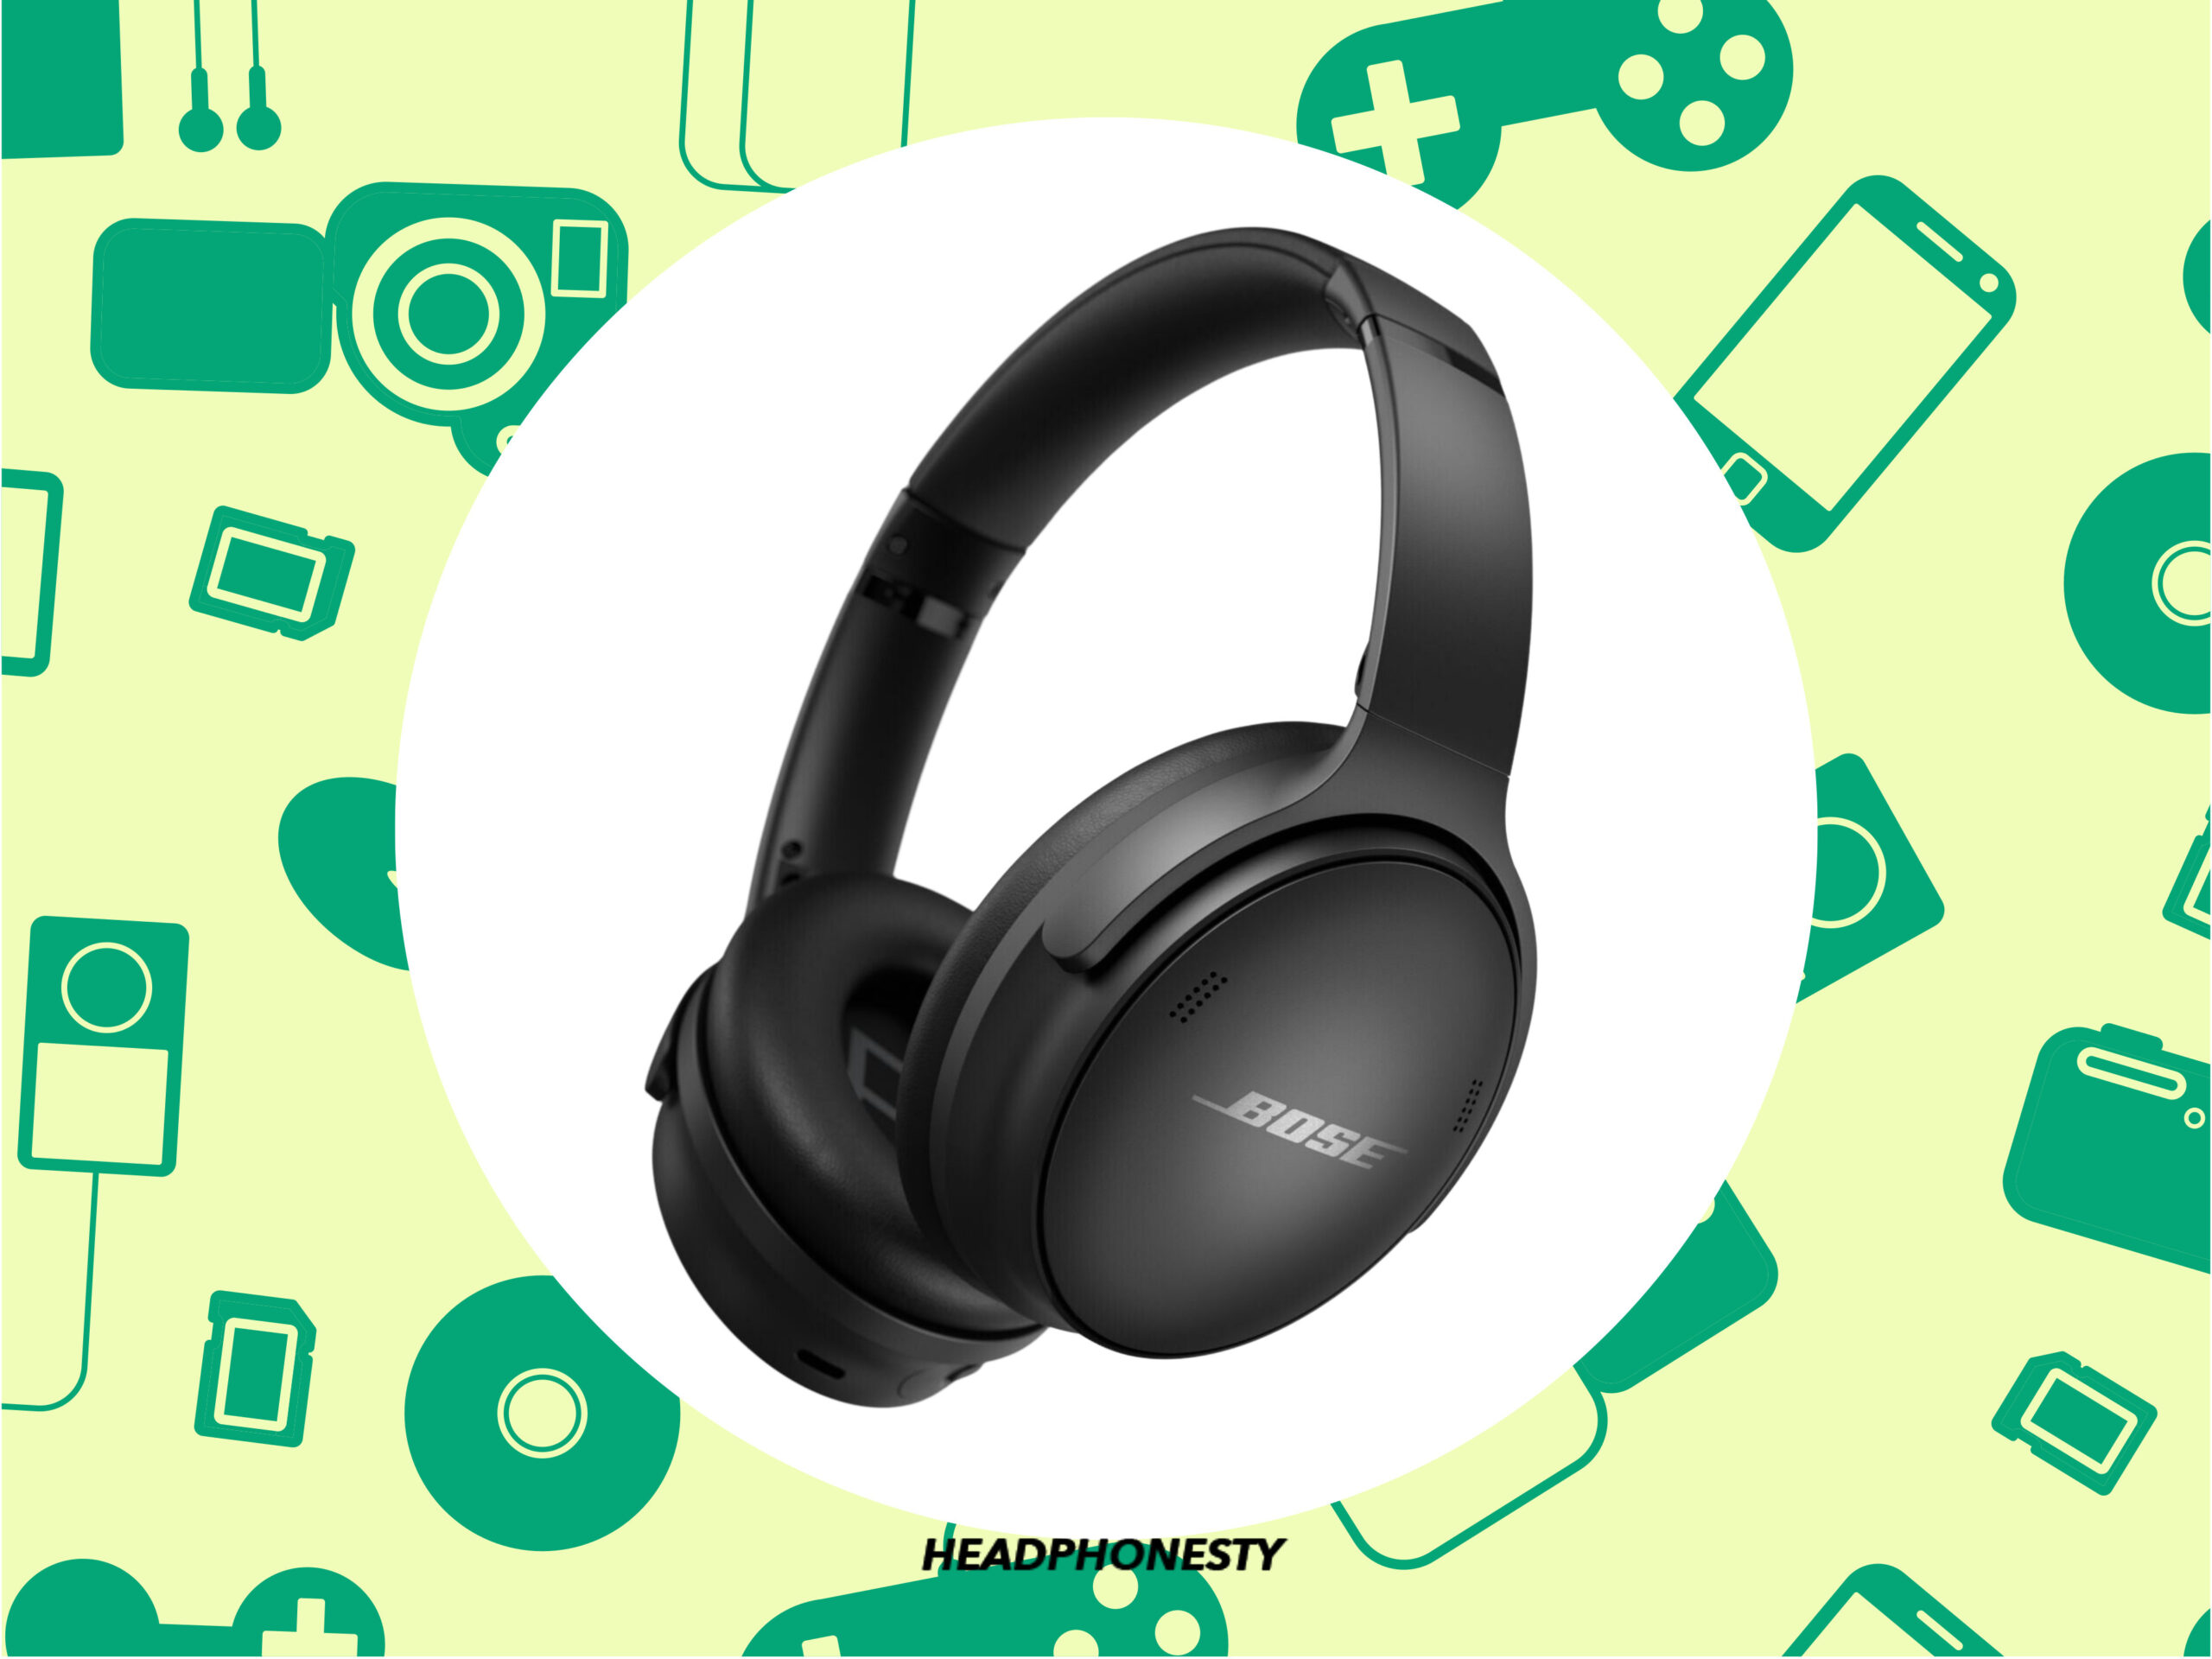 You can connect your Bose headphones with just about any device.